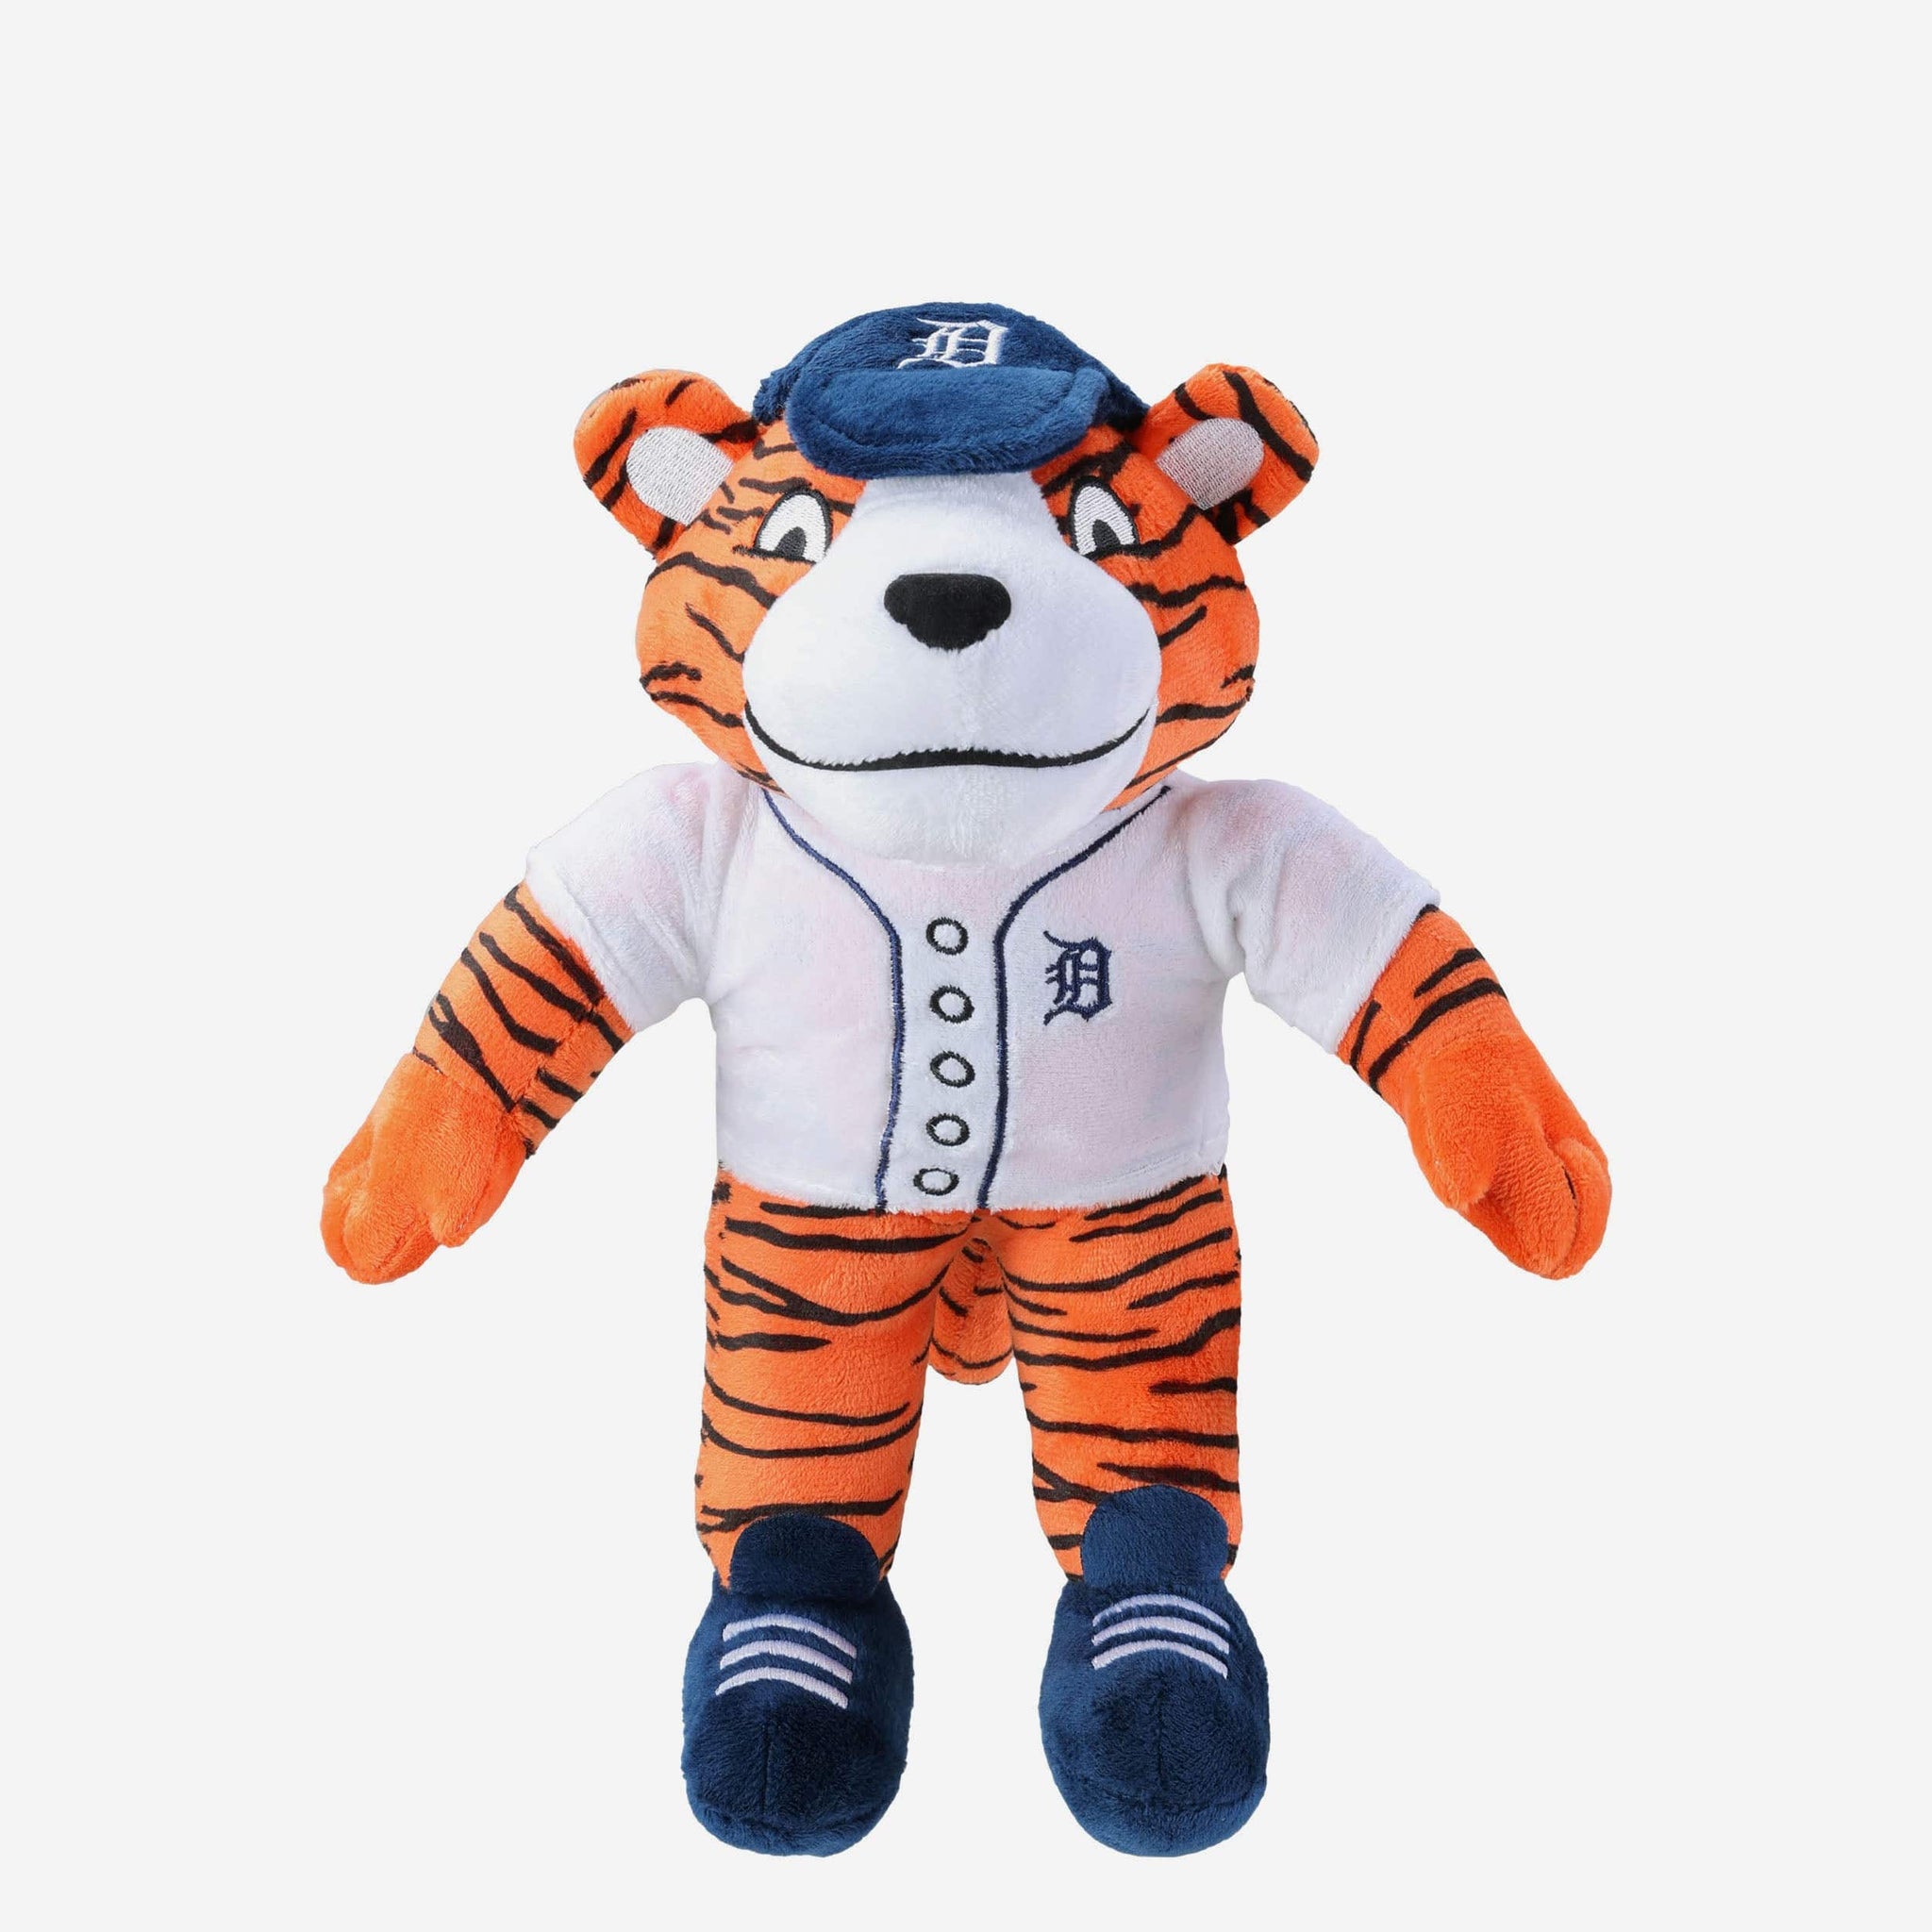 Officially Licensed MLB San Francisco Giants Jersey - Paws Place